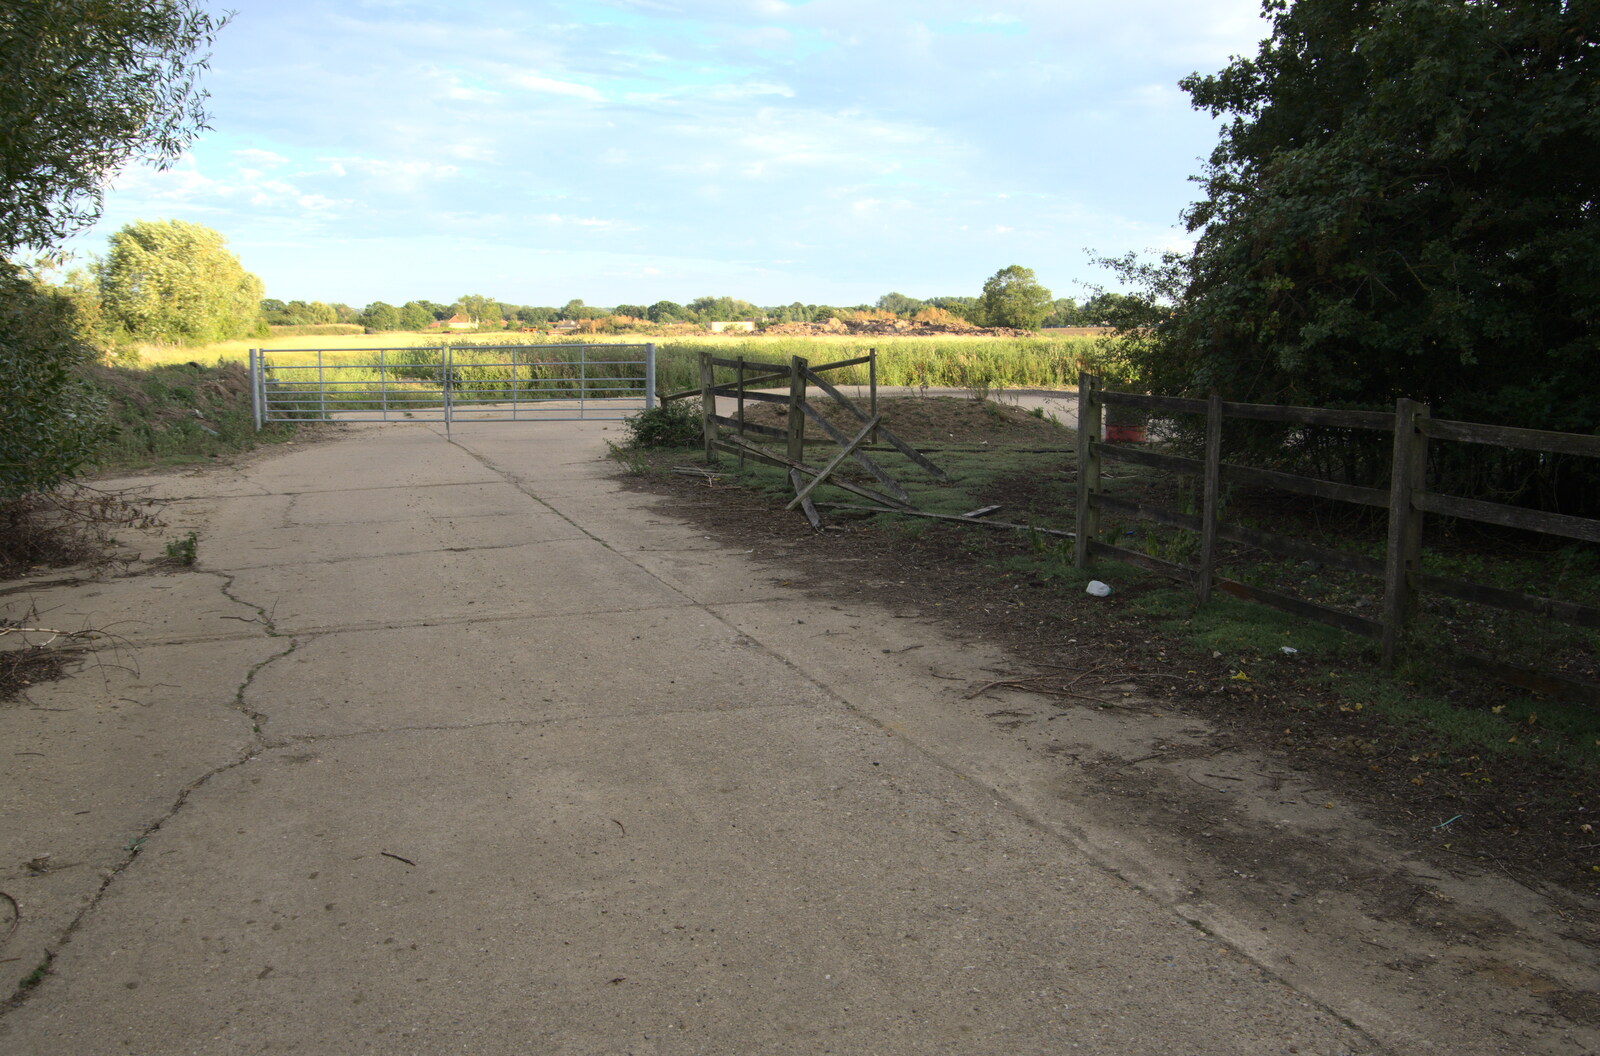 A bit of old taxiway or aircraft parking from Eye Airfield with Mick the Brick, Eye, Suffolk - 5th August 2020